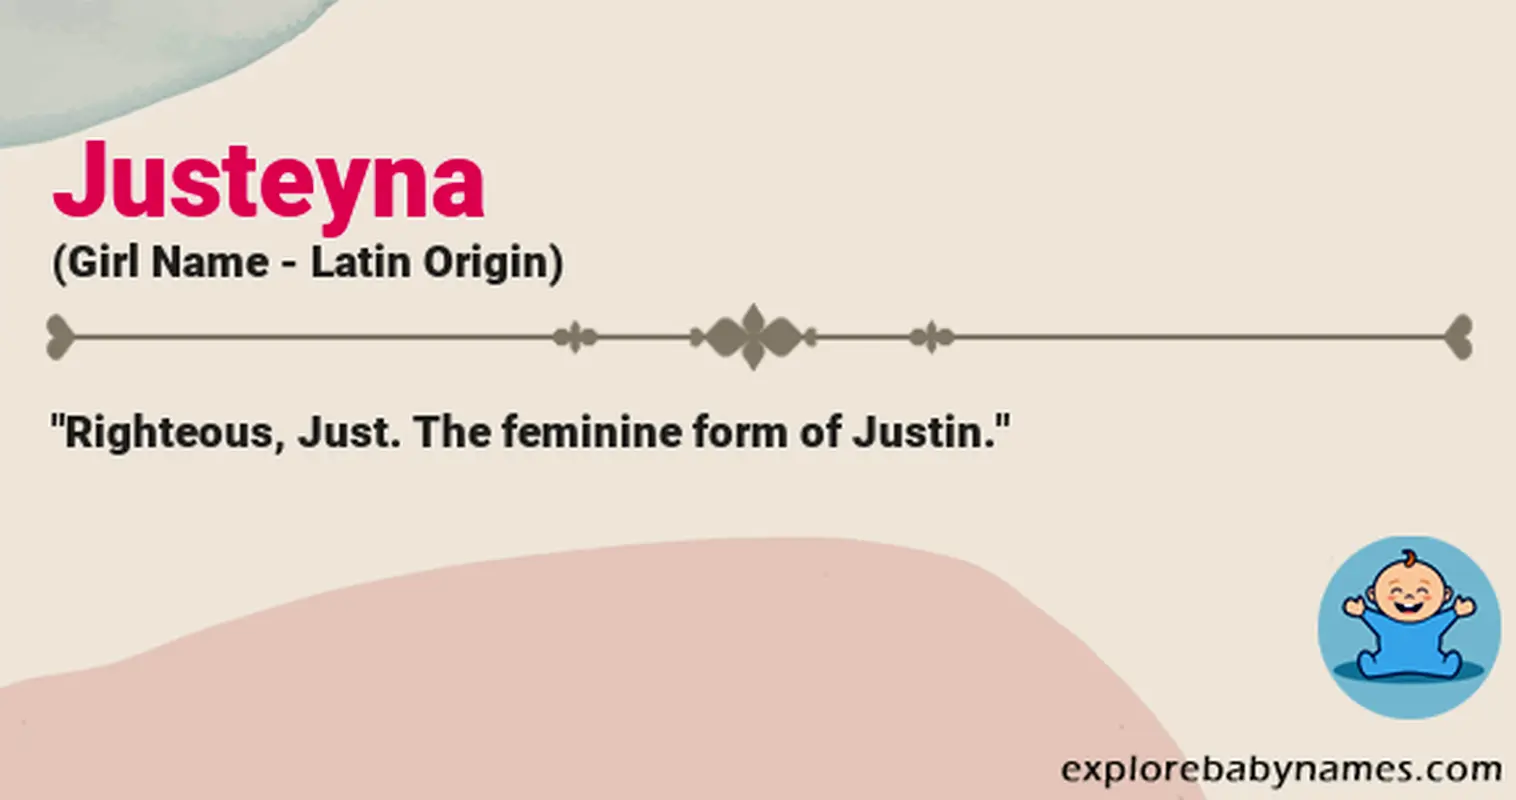 Meaning of Justeyna